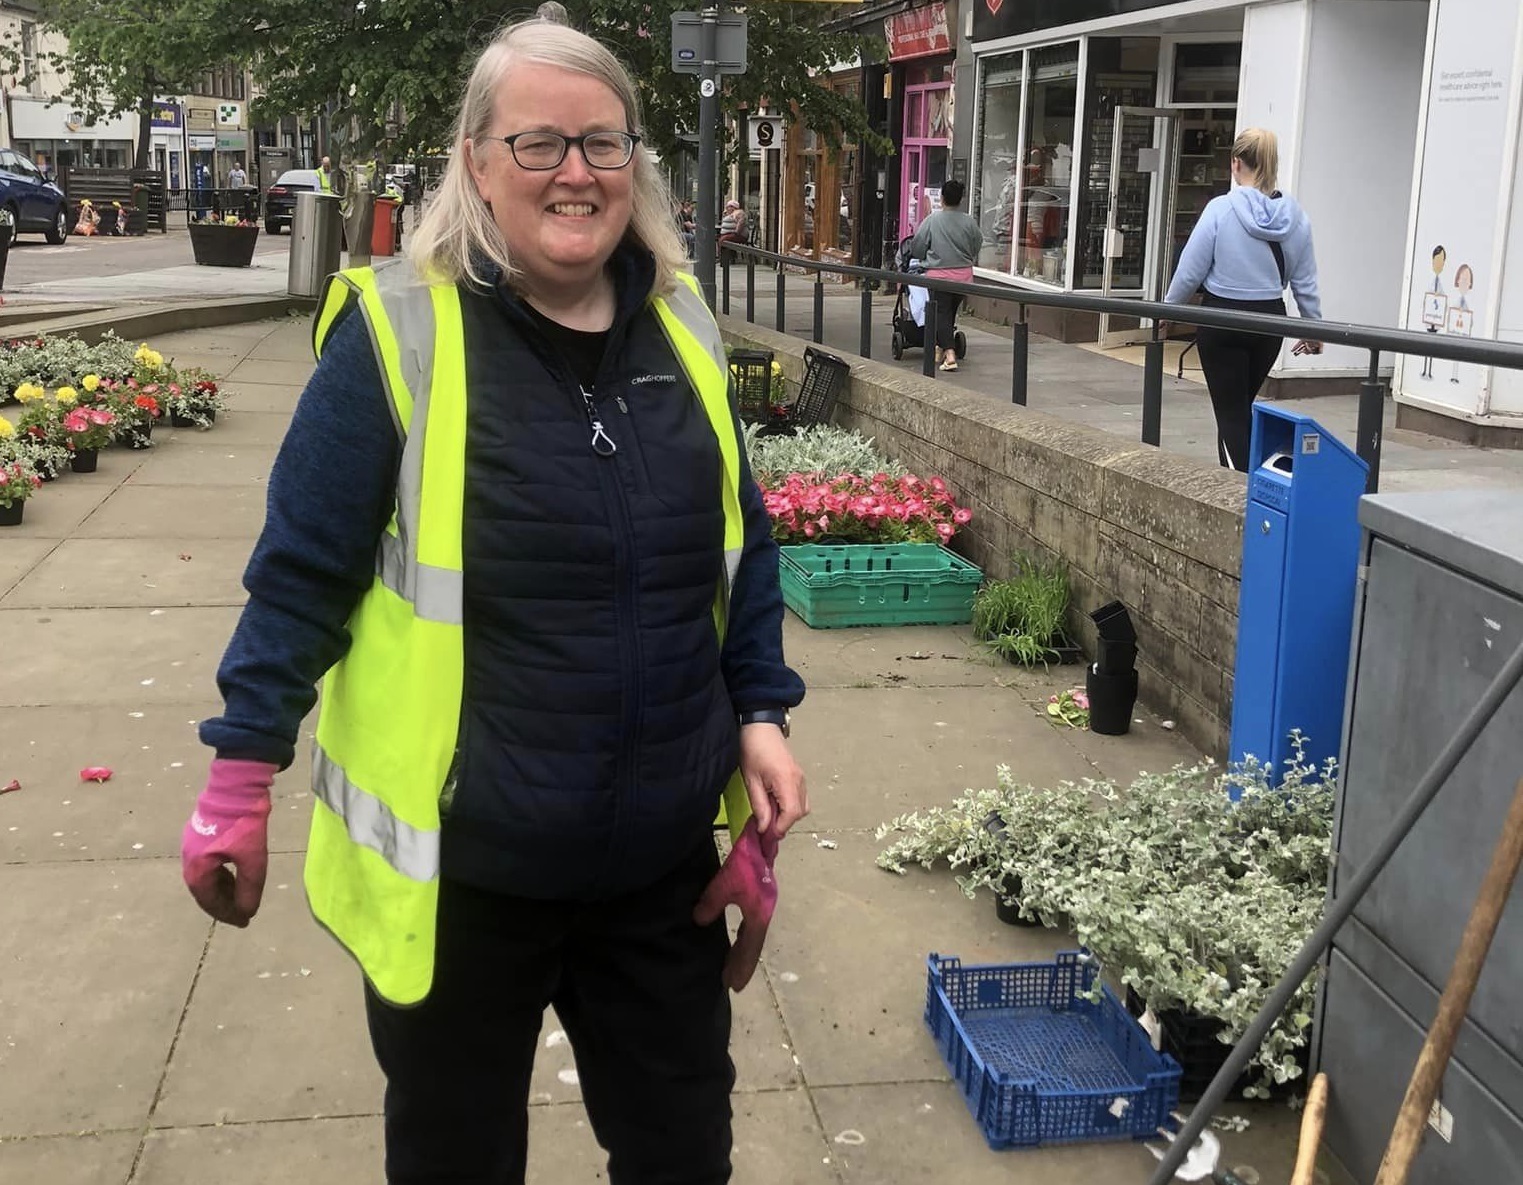 BIG PLANT OUT: People lent a hand in Alloa town centre to help bring colour to the area - Pictures courtesy of Alloa First